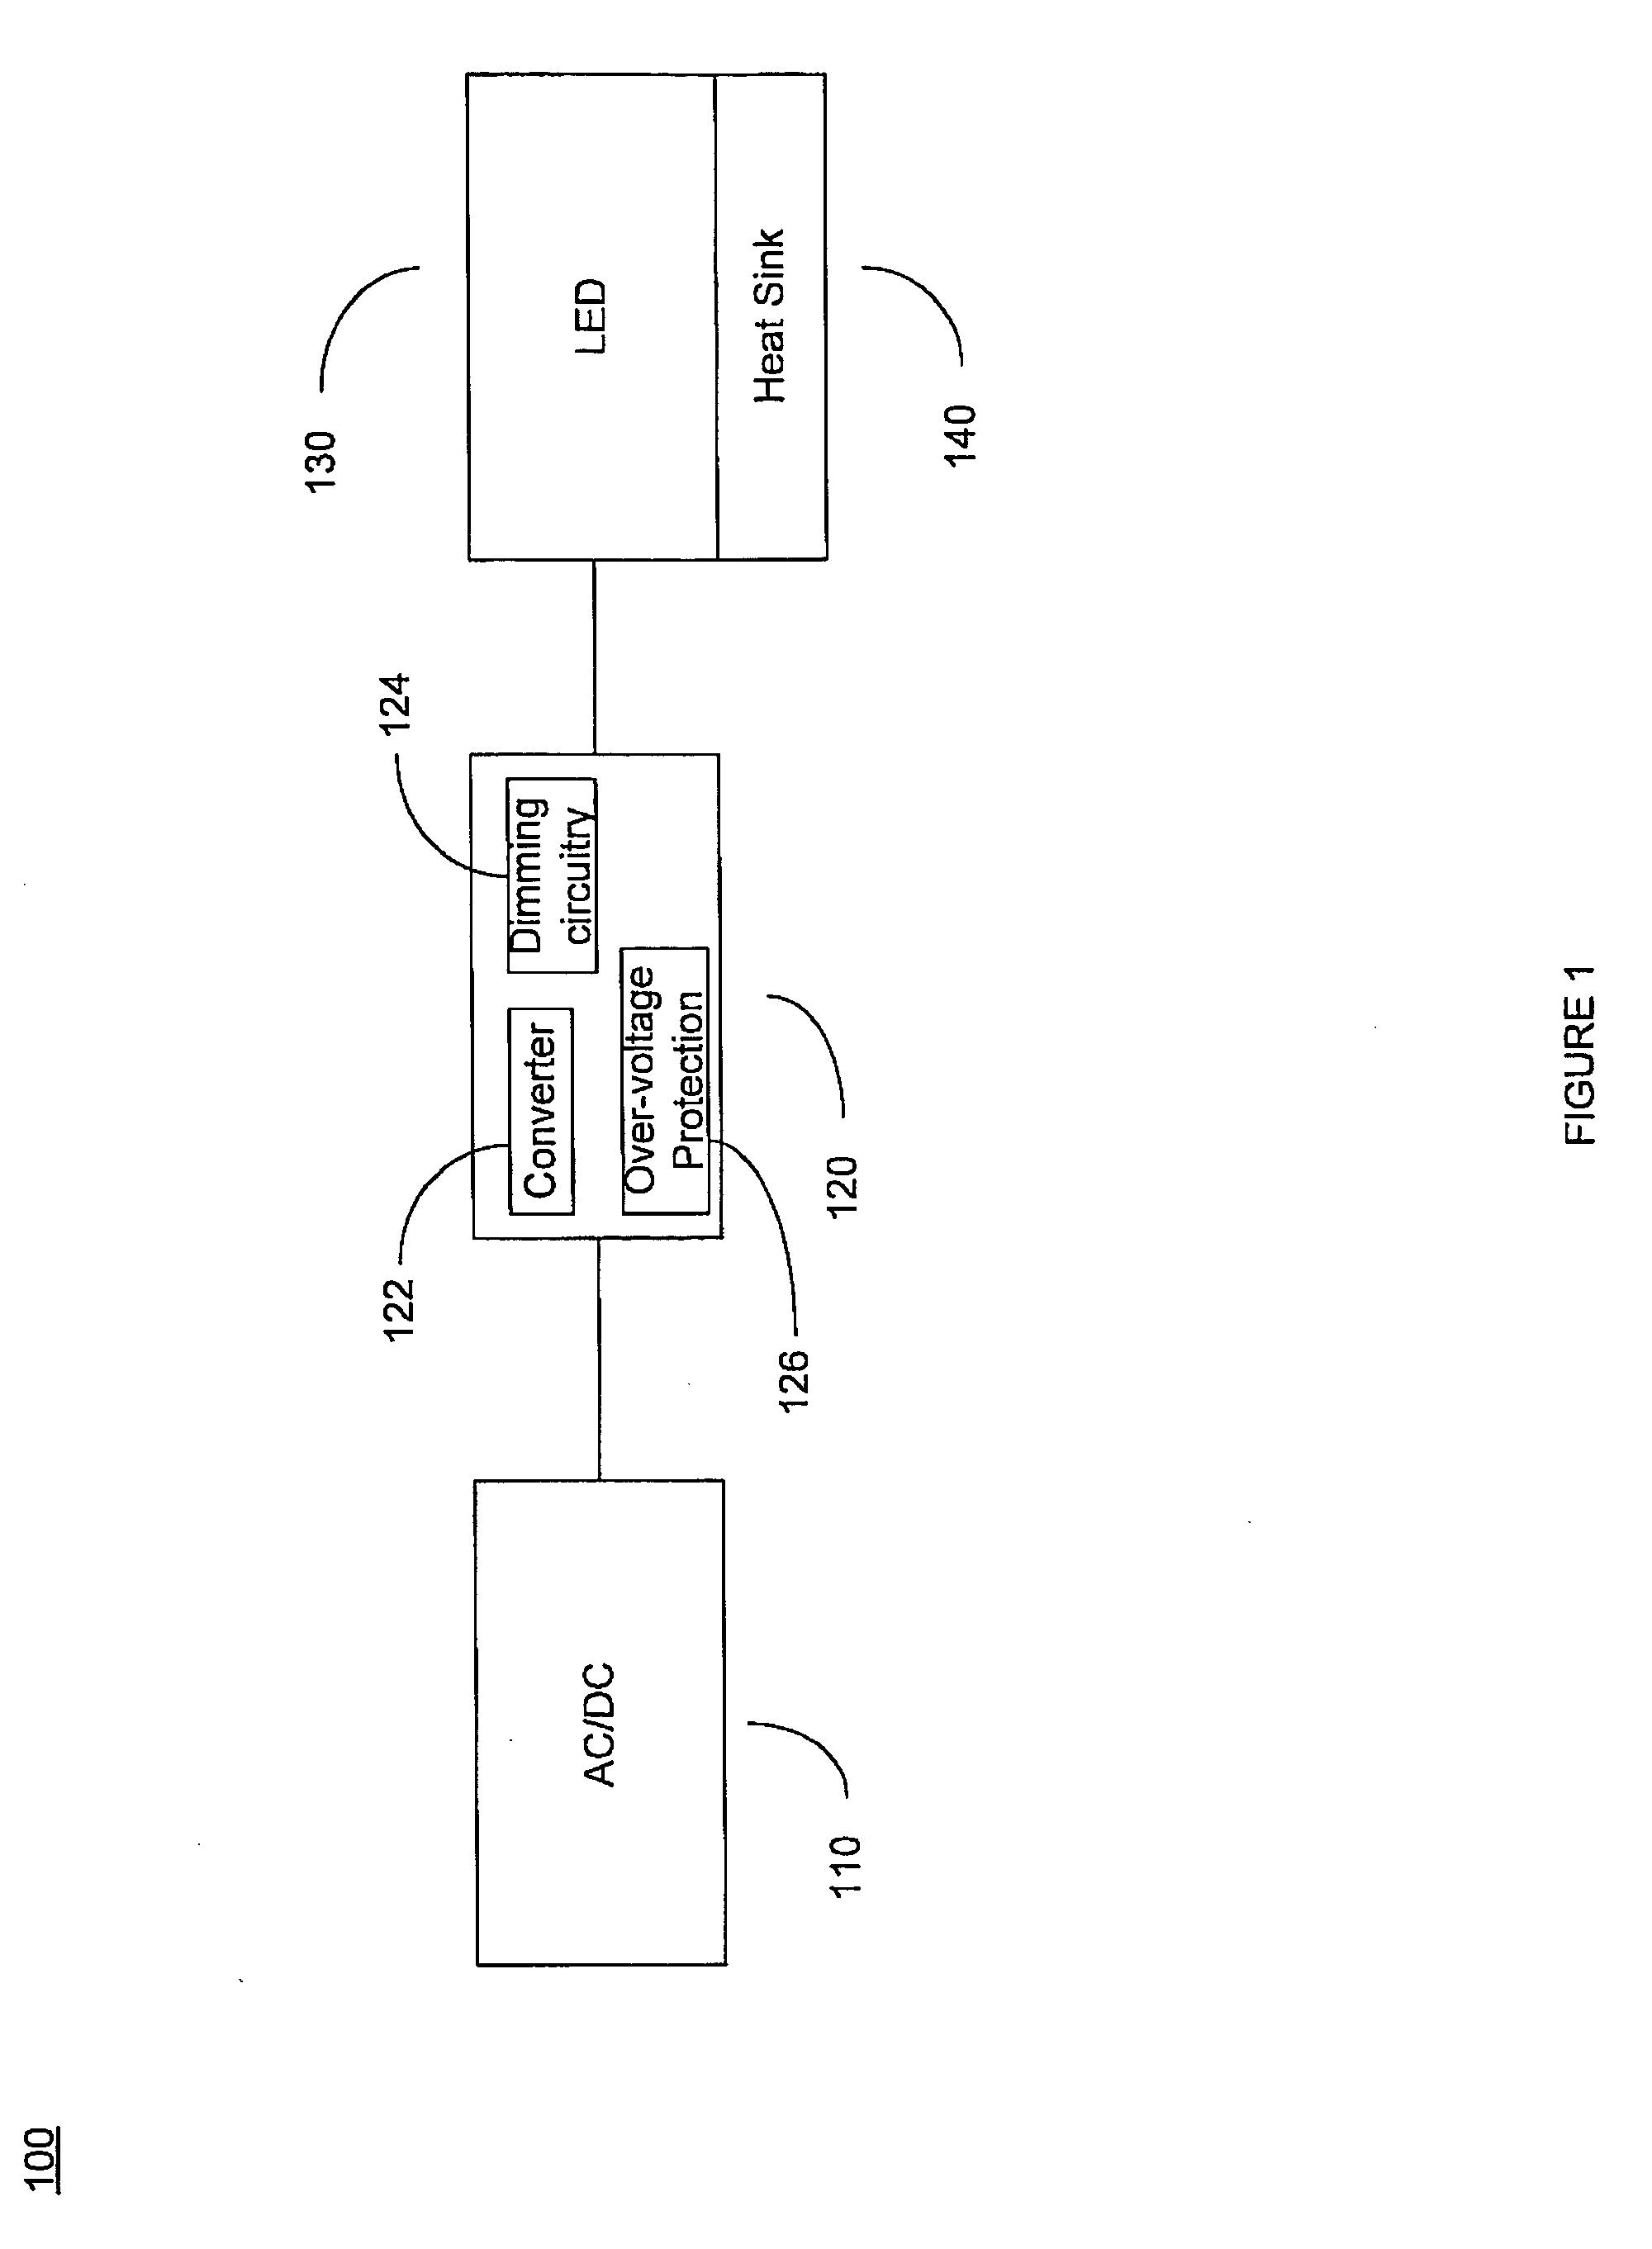 Light device having LED illumination and an electronic circuit board